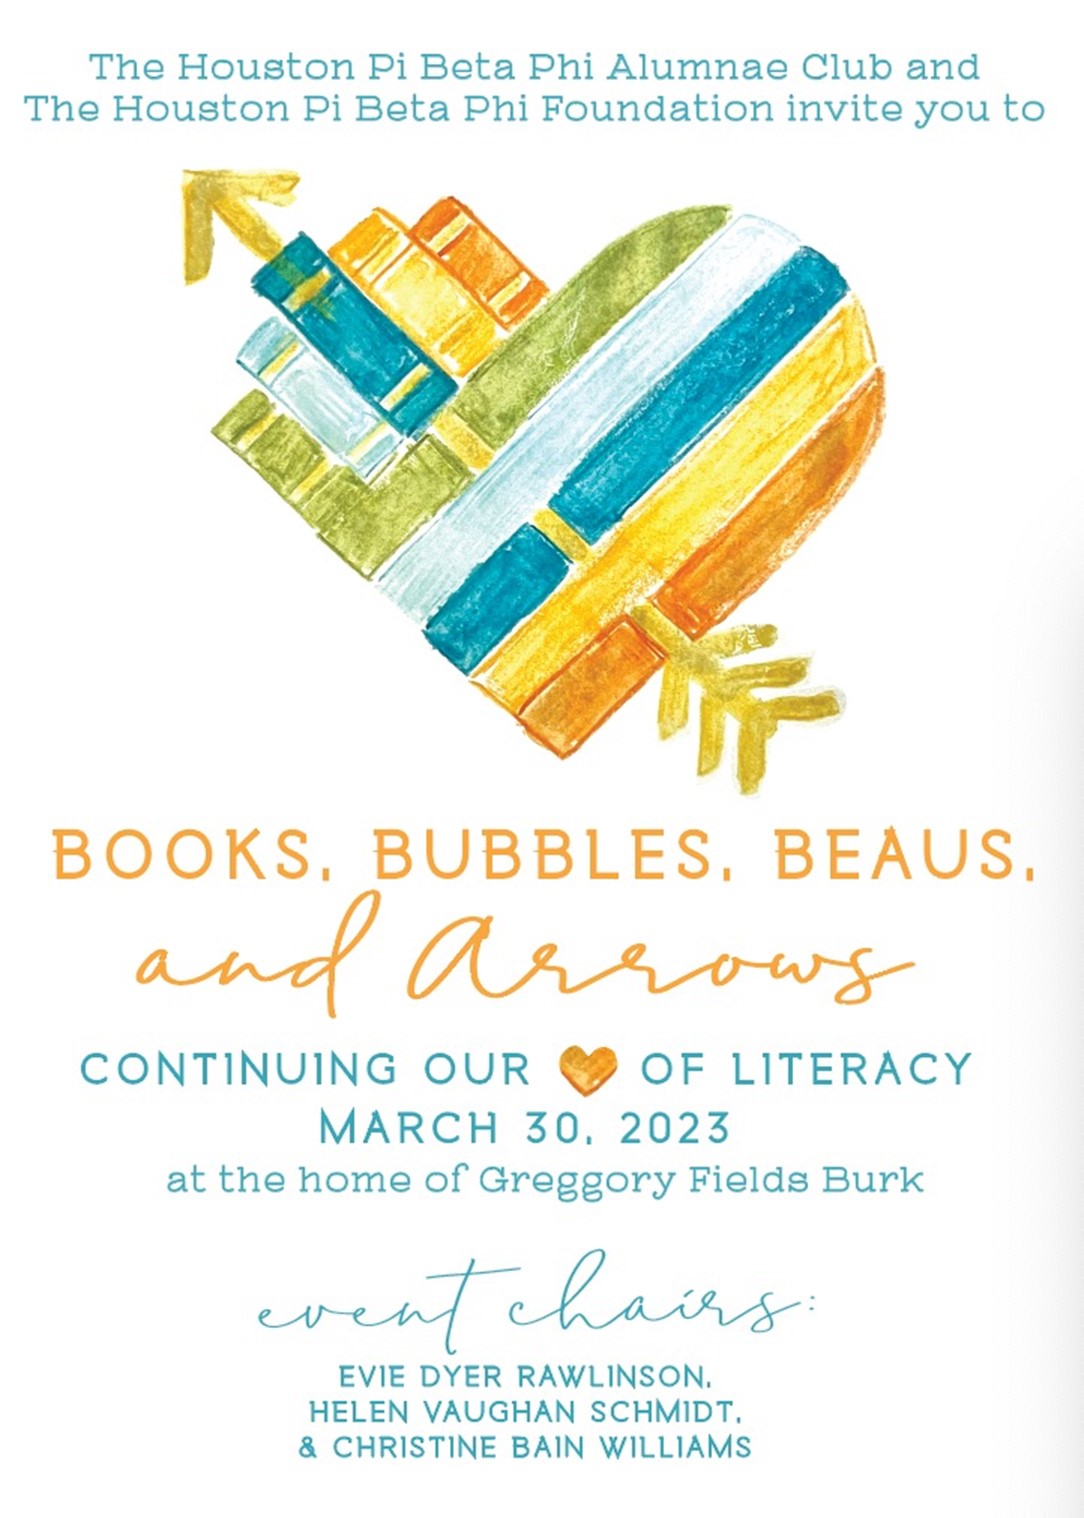 The Houston Pi Beta Phi Alumnae Club and The Houston Pi Beta Phi Foundation invite you to Books, Bubbles, Beaus, and Arrows, continuing our heart of literacy, March 30, 2023, at the home of Greggory Fields Burk. Event chairs: Evie Dyer Rawlingson, Helen Vaughan Schmidt, and Christine Bain Williams.